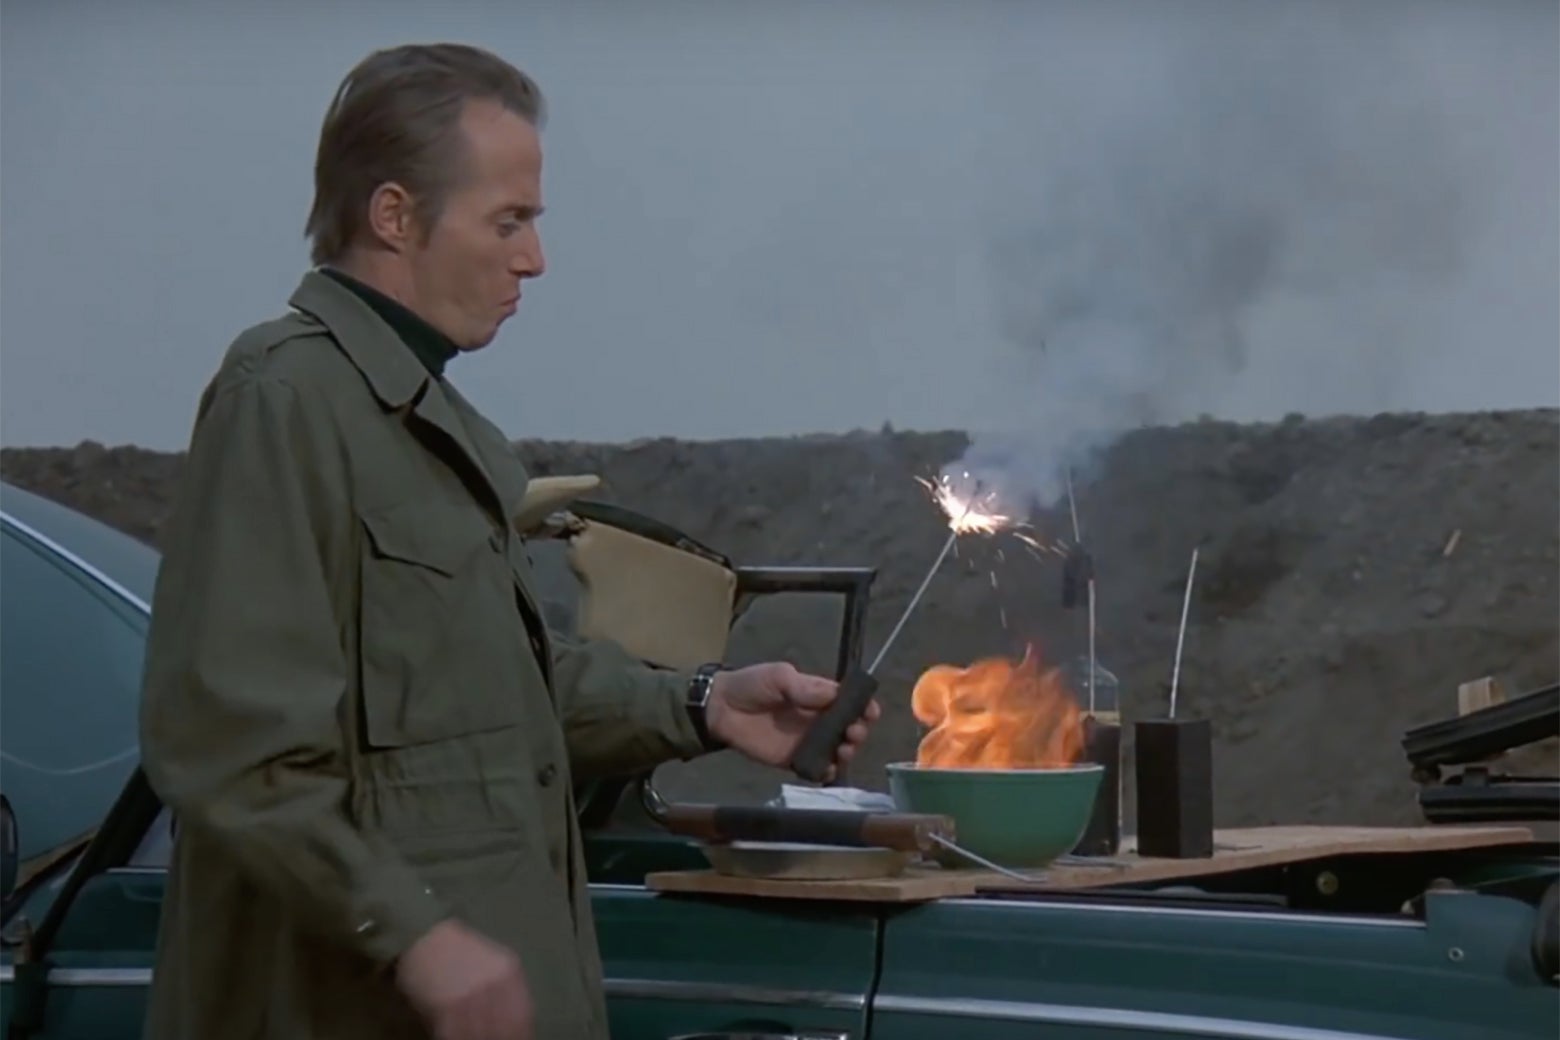 A man in a trench coat holds a cartoonish dynamite prop. He is lighting the fuse from flames that rise from a green mixing bowl, which is next to several other bombs.